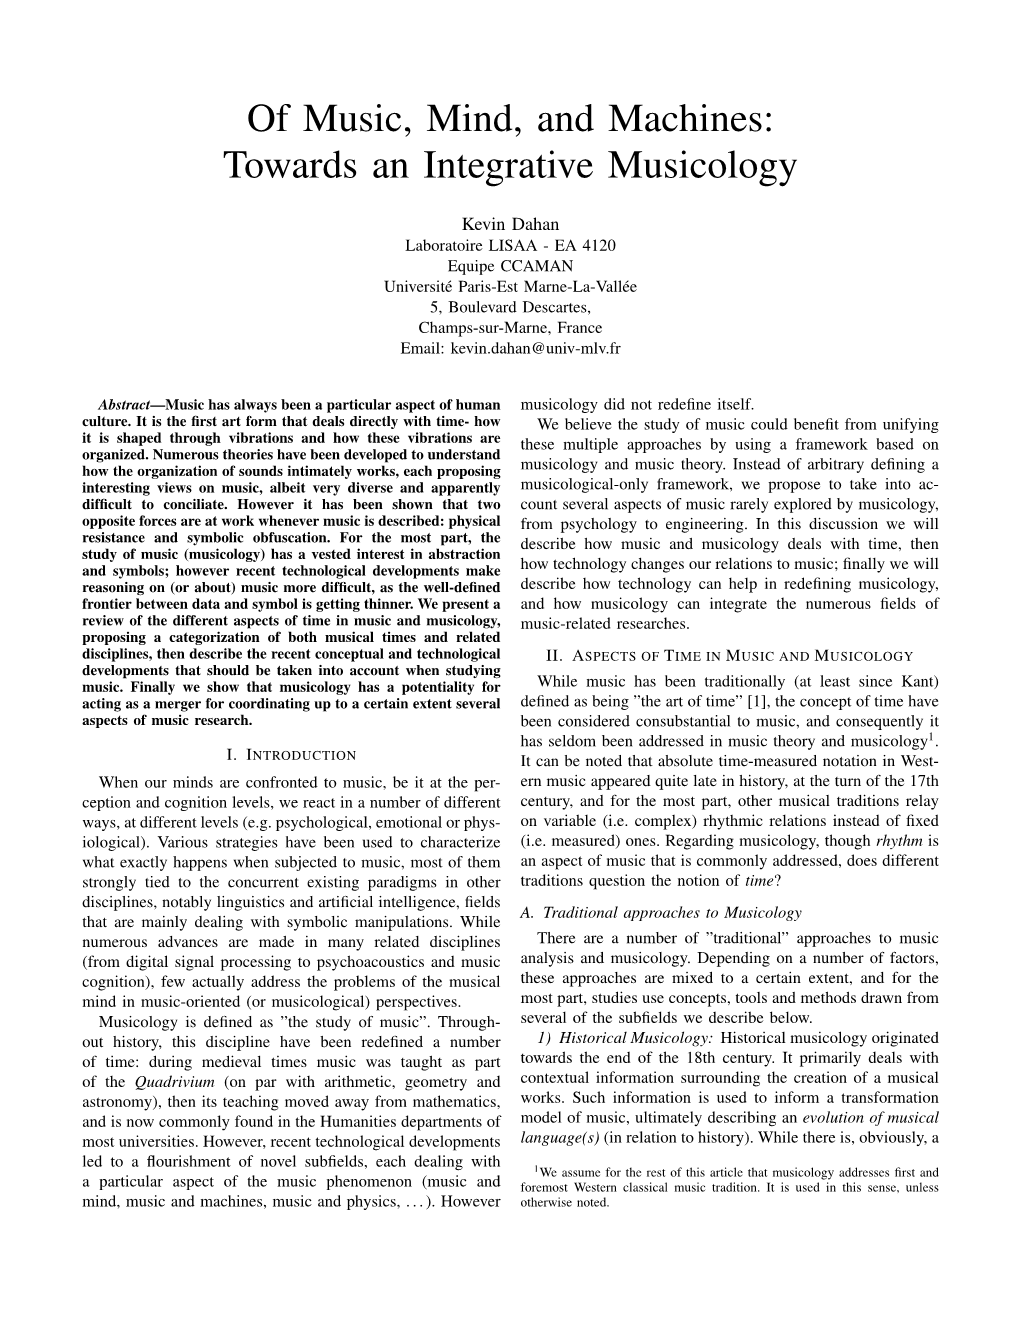 Of Music, Mind, and Machines: Towards an Integrative Musicology